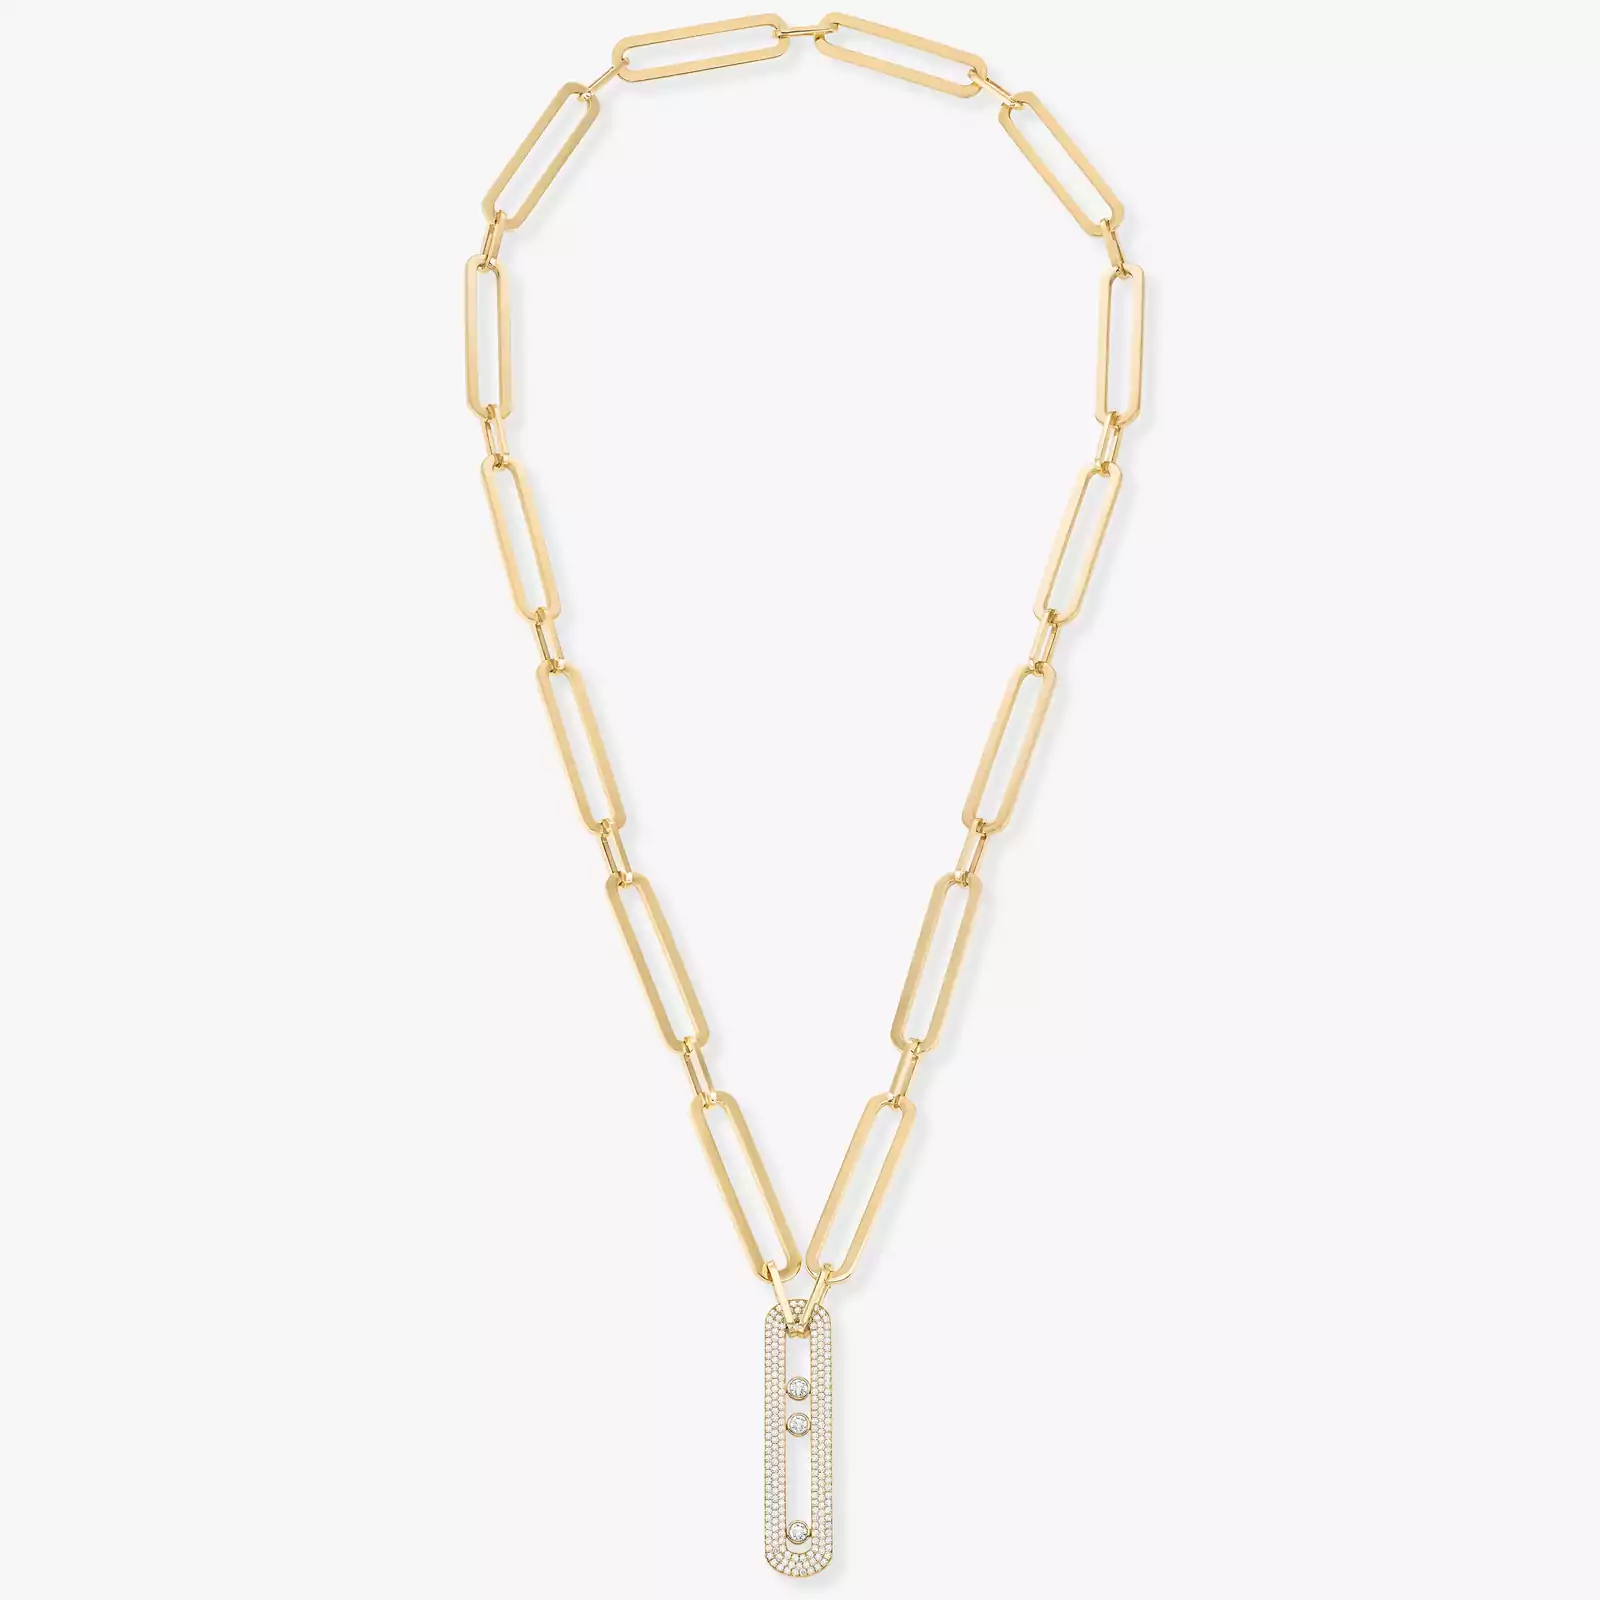 Move 10th Anniversary XL Yellow Gold For Her Diamond Necklace 06768-YG